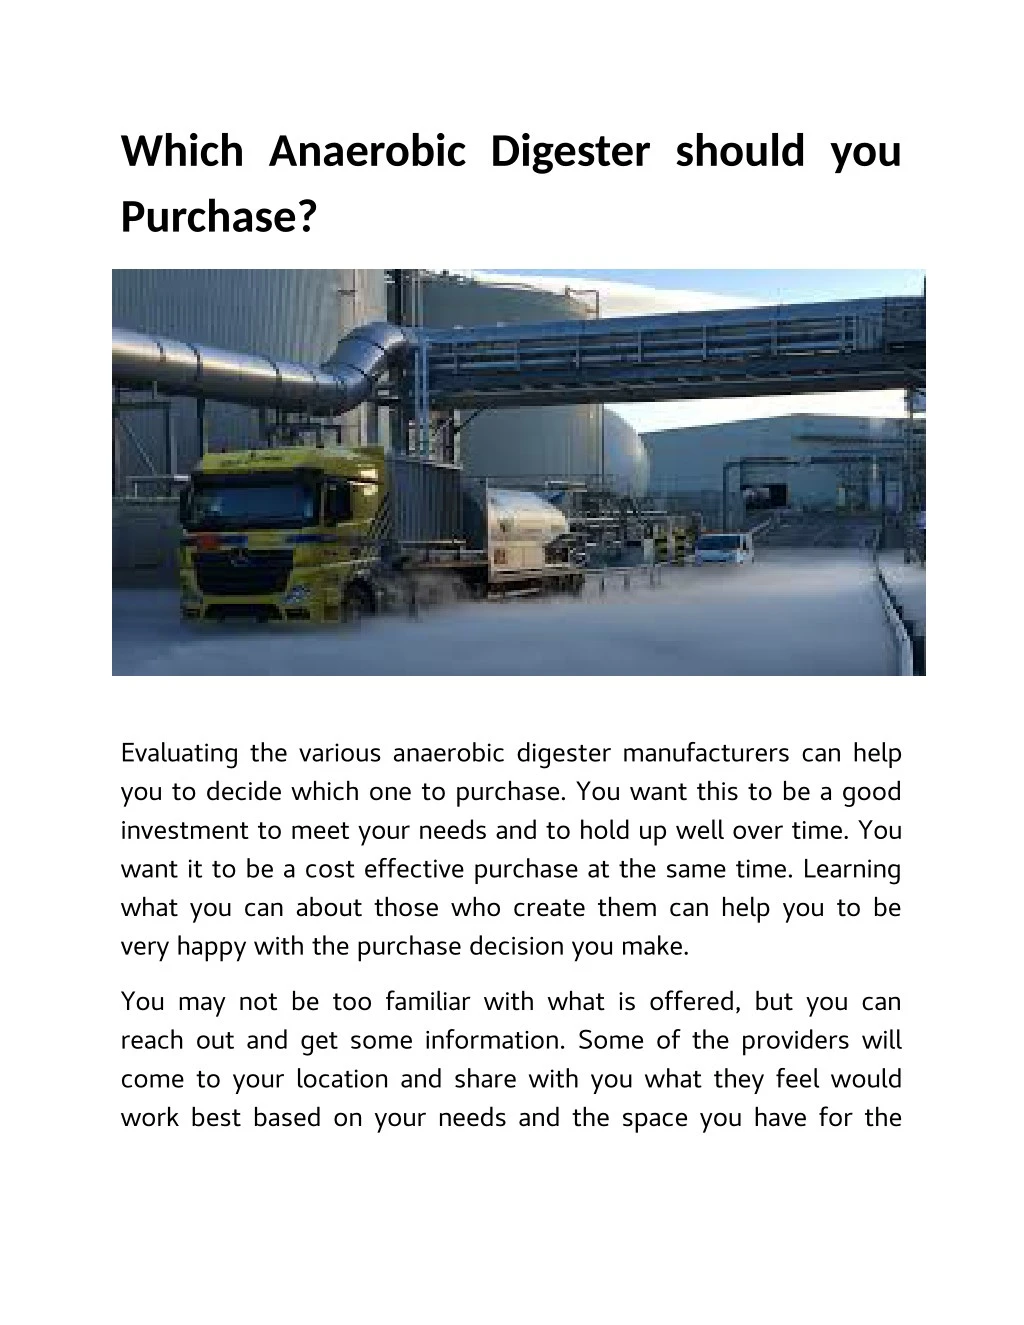 which anaerobic digester should you purchase